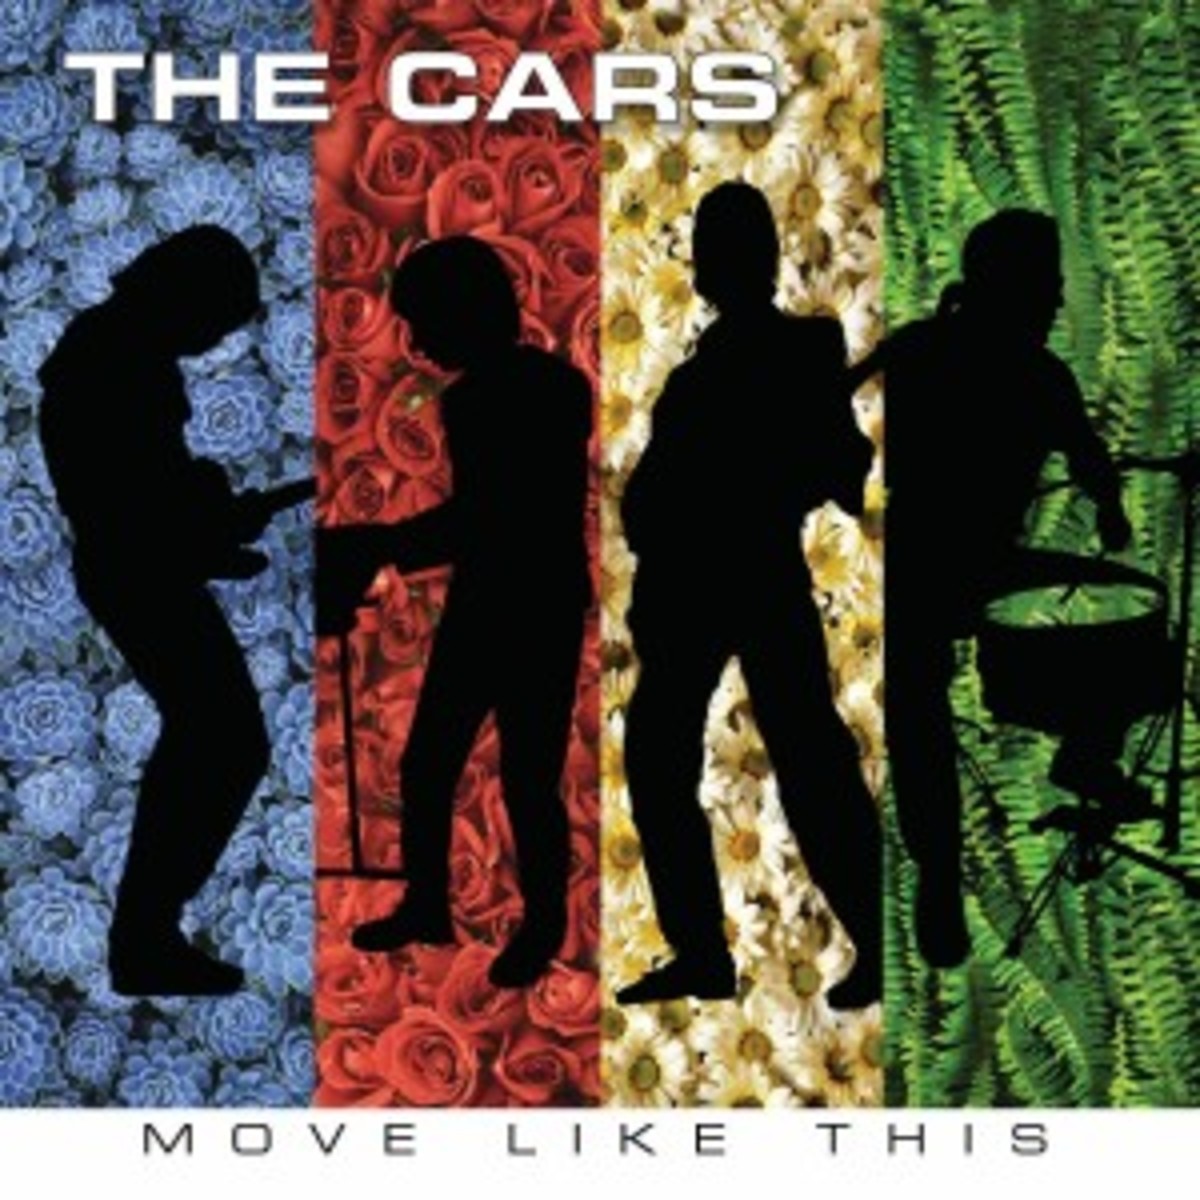 The Cars Move Like This